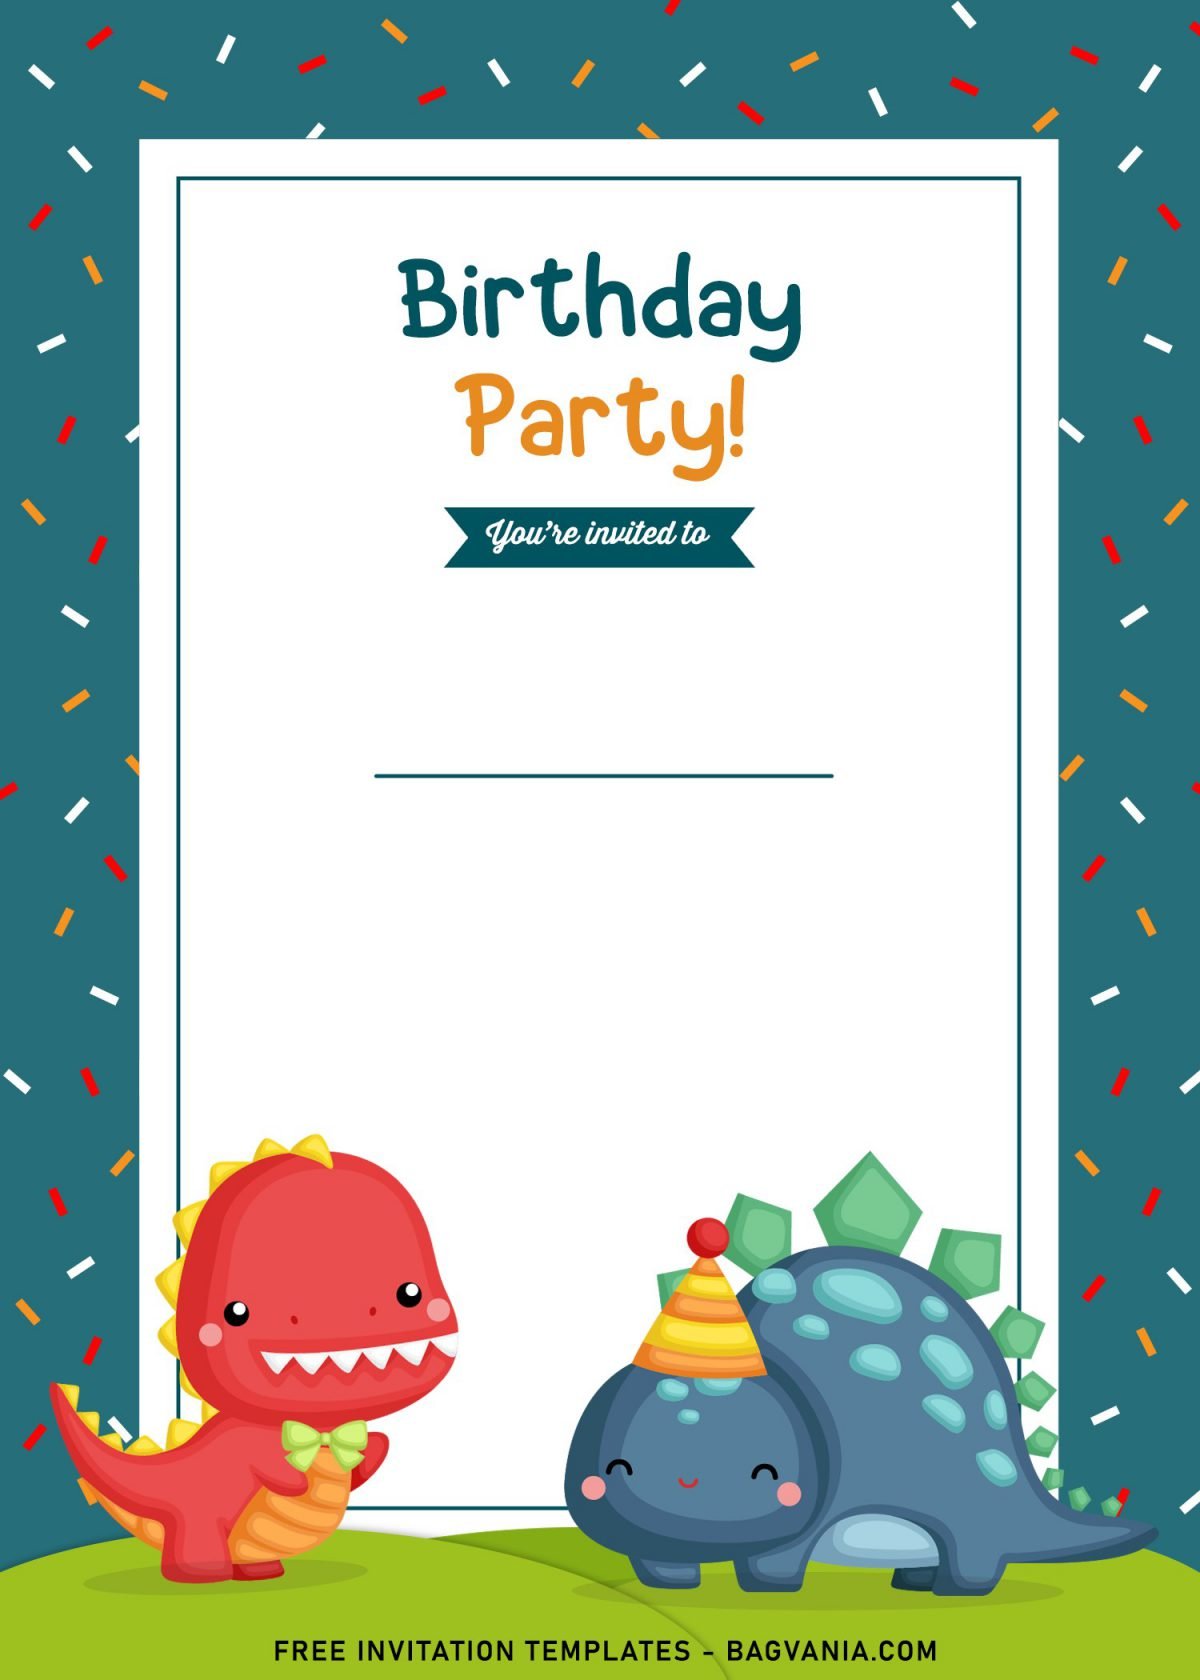 9+ Awesome Dino Party Birthday Invitation Templates and has 